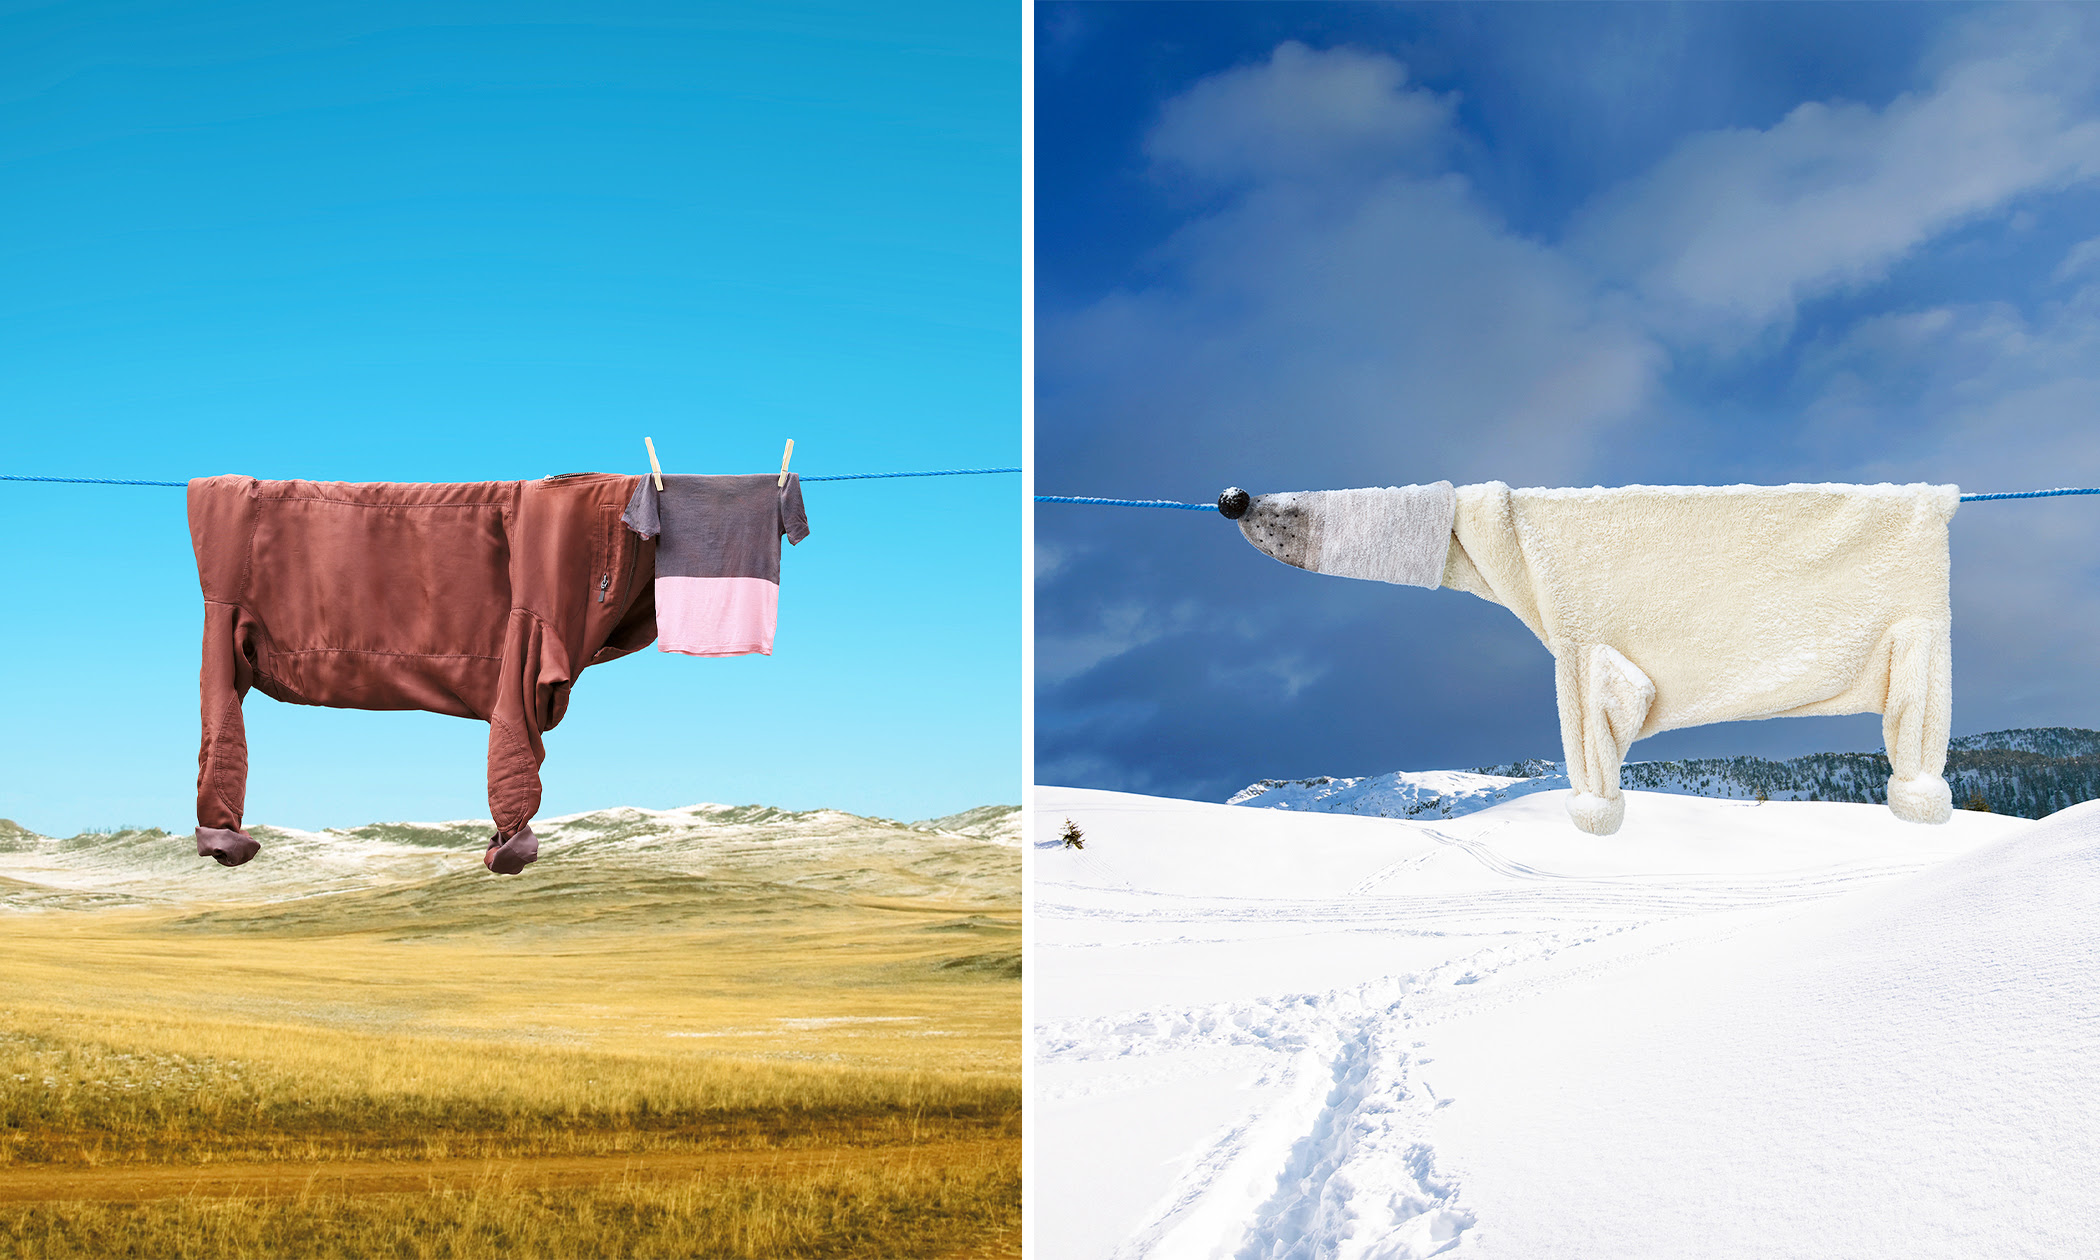 Photos: Artist Transforms Hanging Laundry and Everyday Items Into Surreal Characters